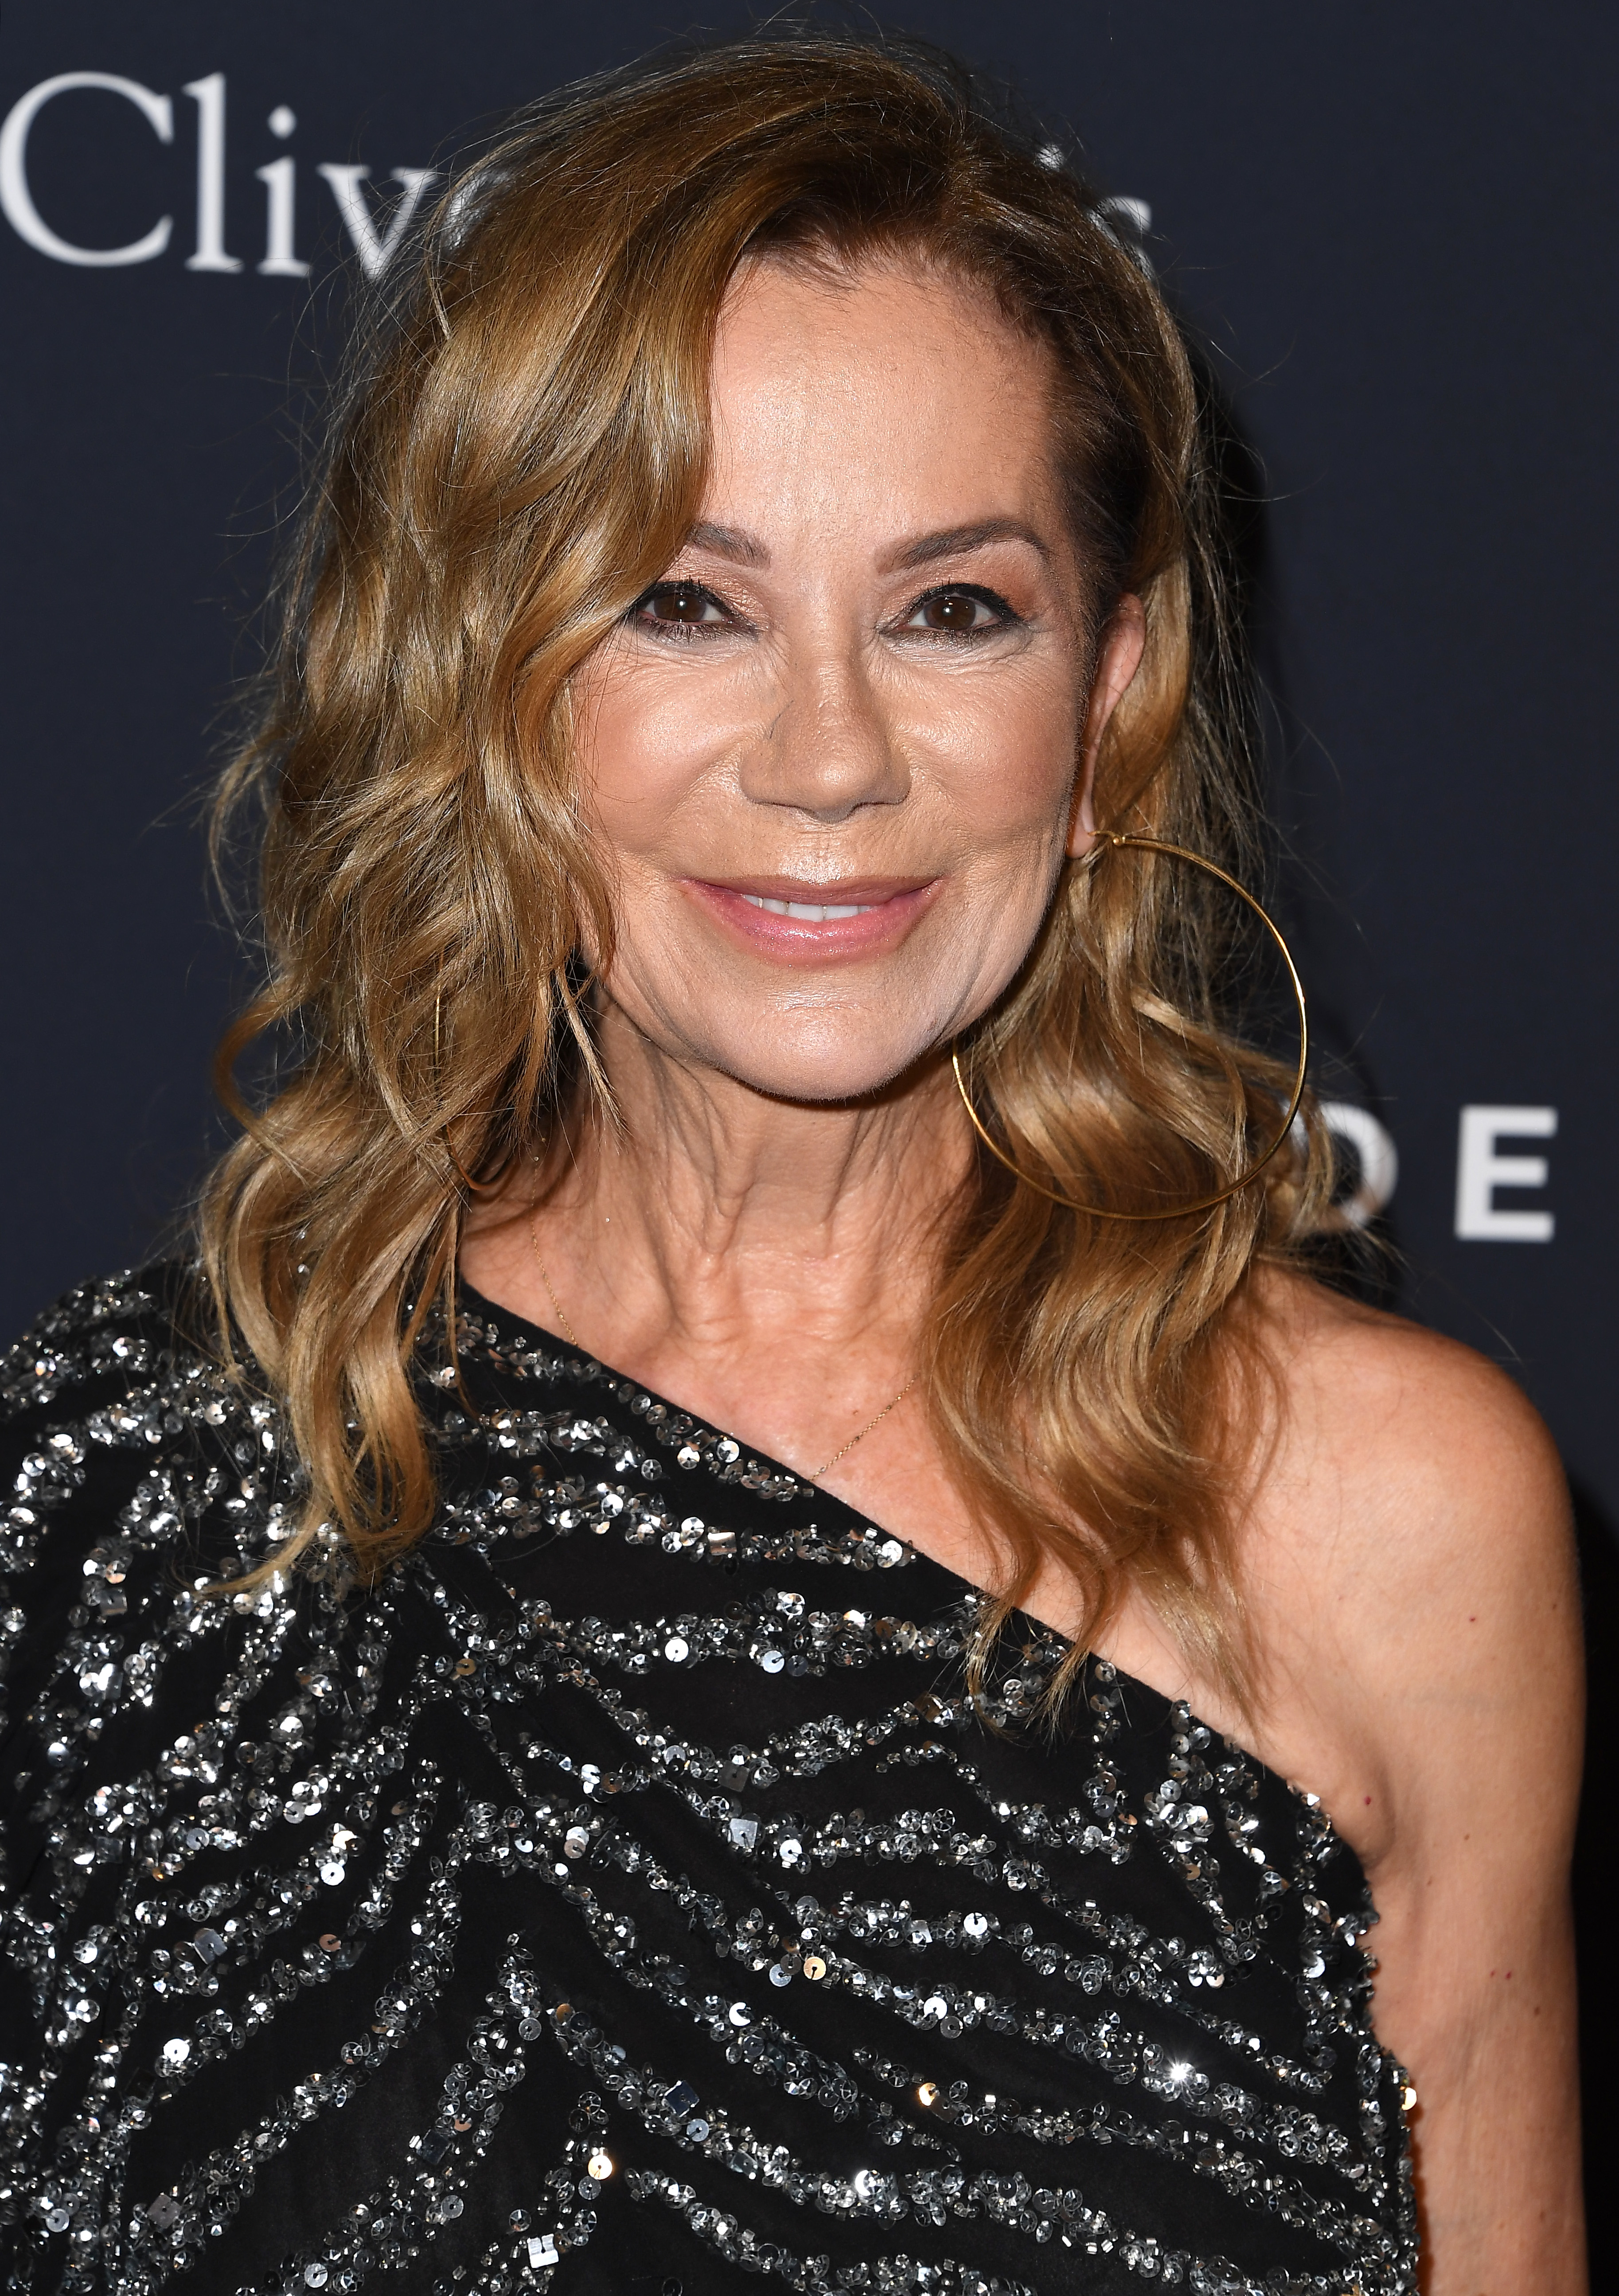 Kathie Lee Gifford at the Pre-GRAMMY Gala and GRAMMY Salute to Industry Icons Honoring Sean "Diddy" Combs at The Beverly Hilton Hotel on January 25, 2020 | Source: Getty Images